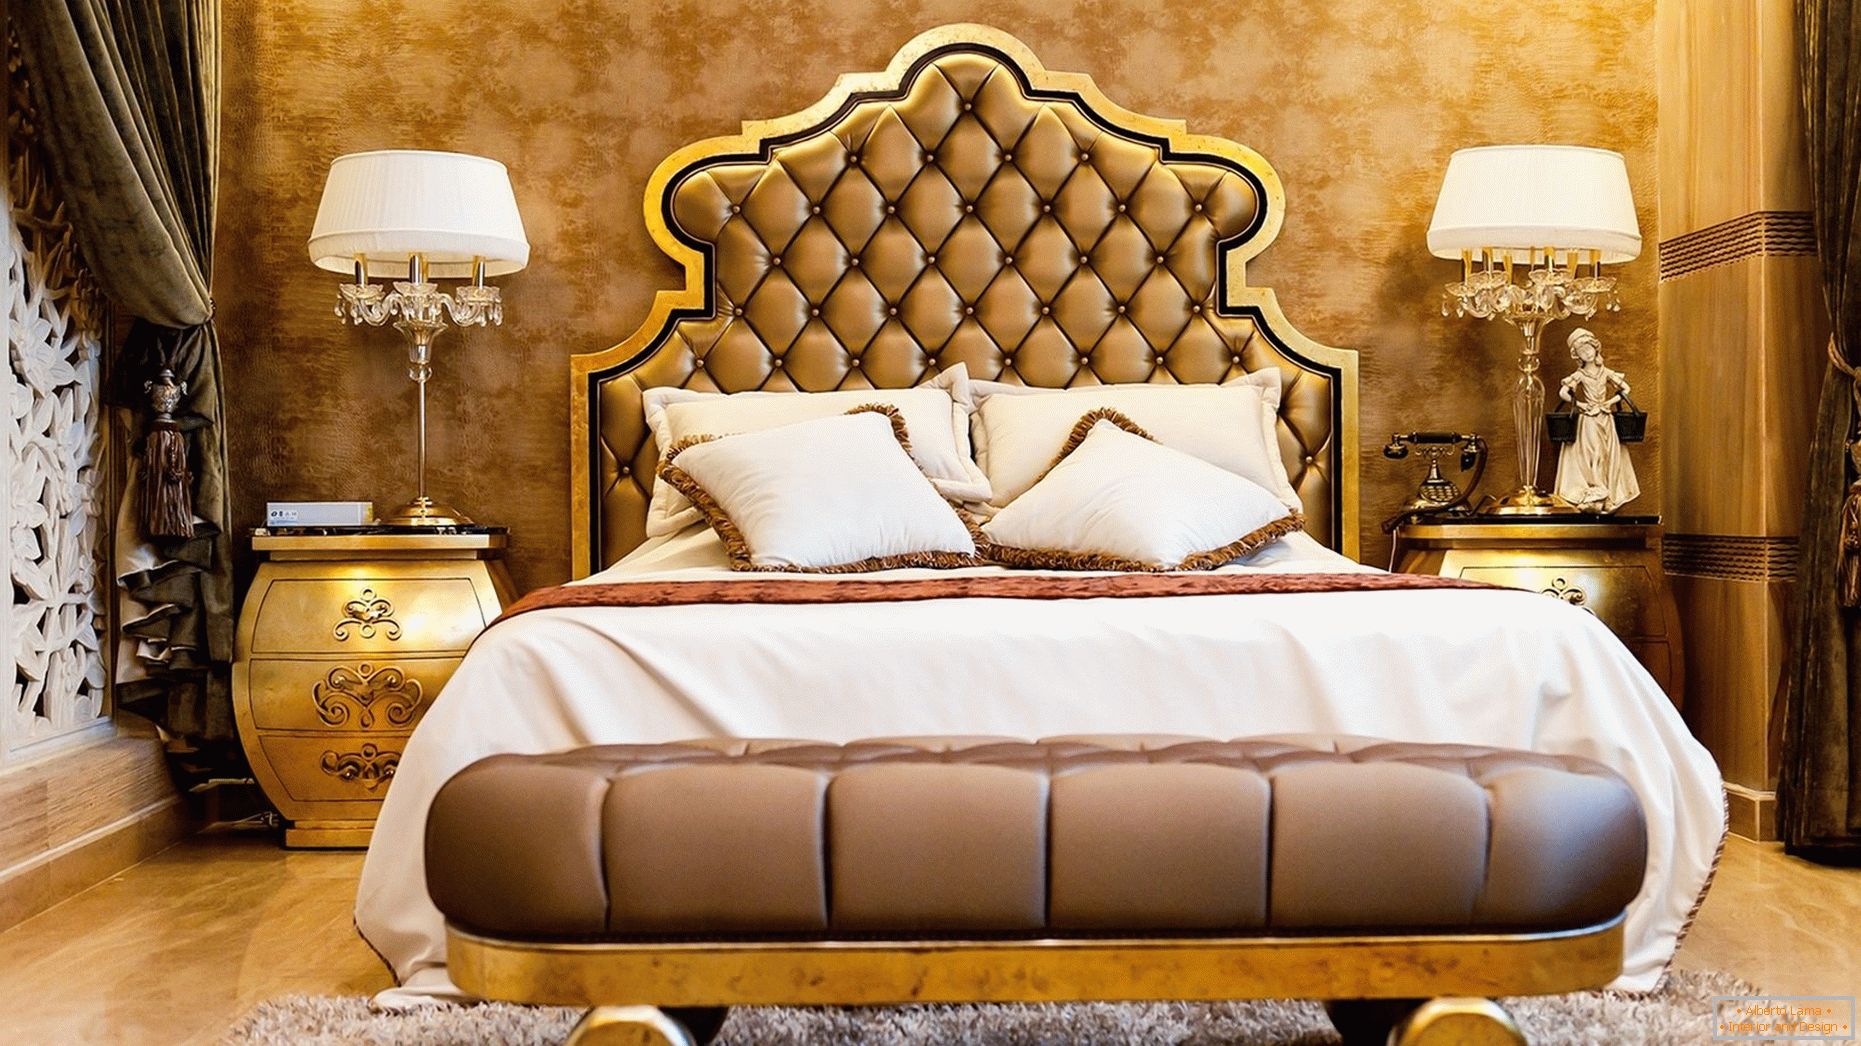 Gold wallpaper in the design of rooms